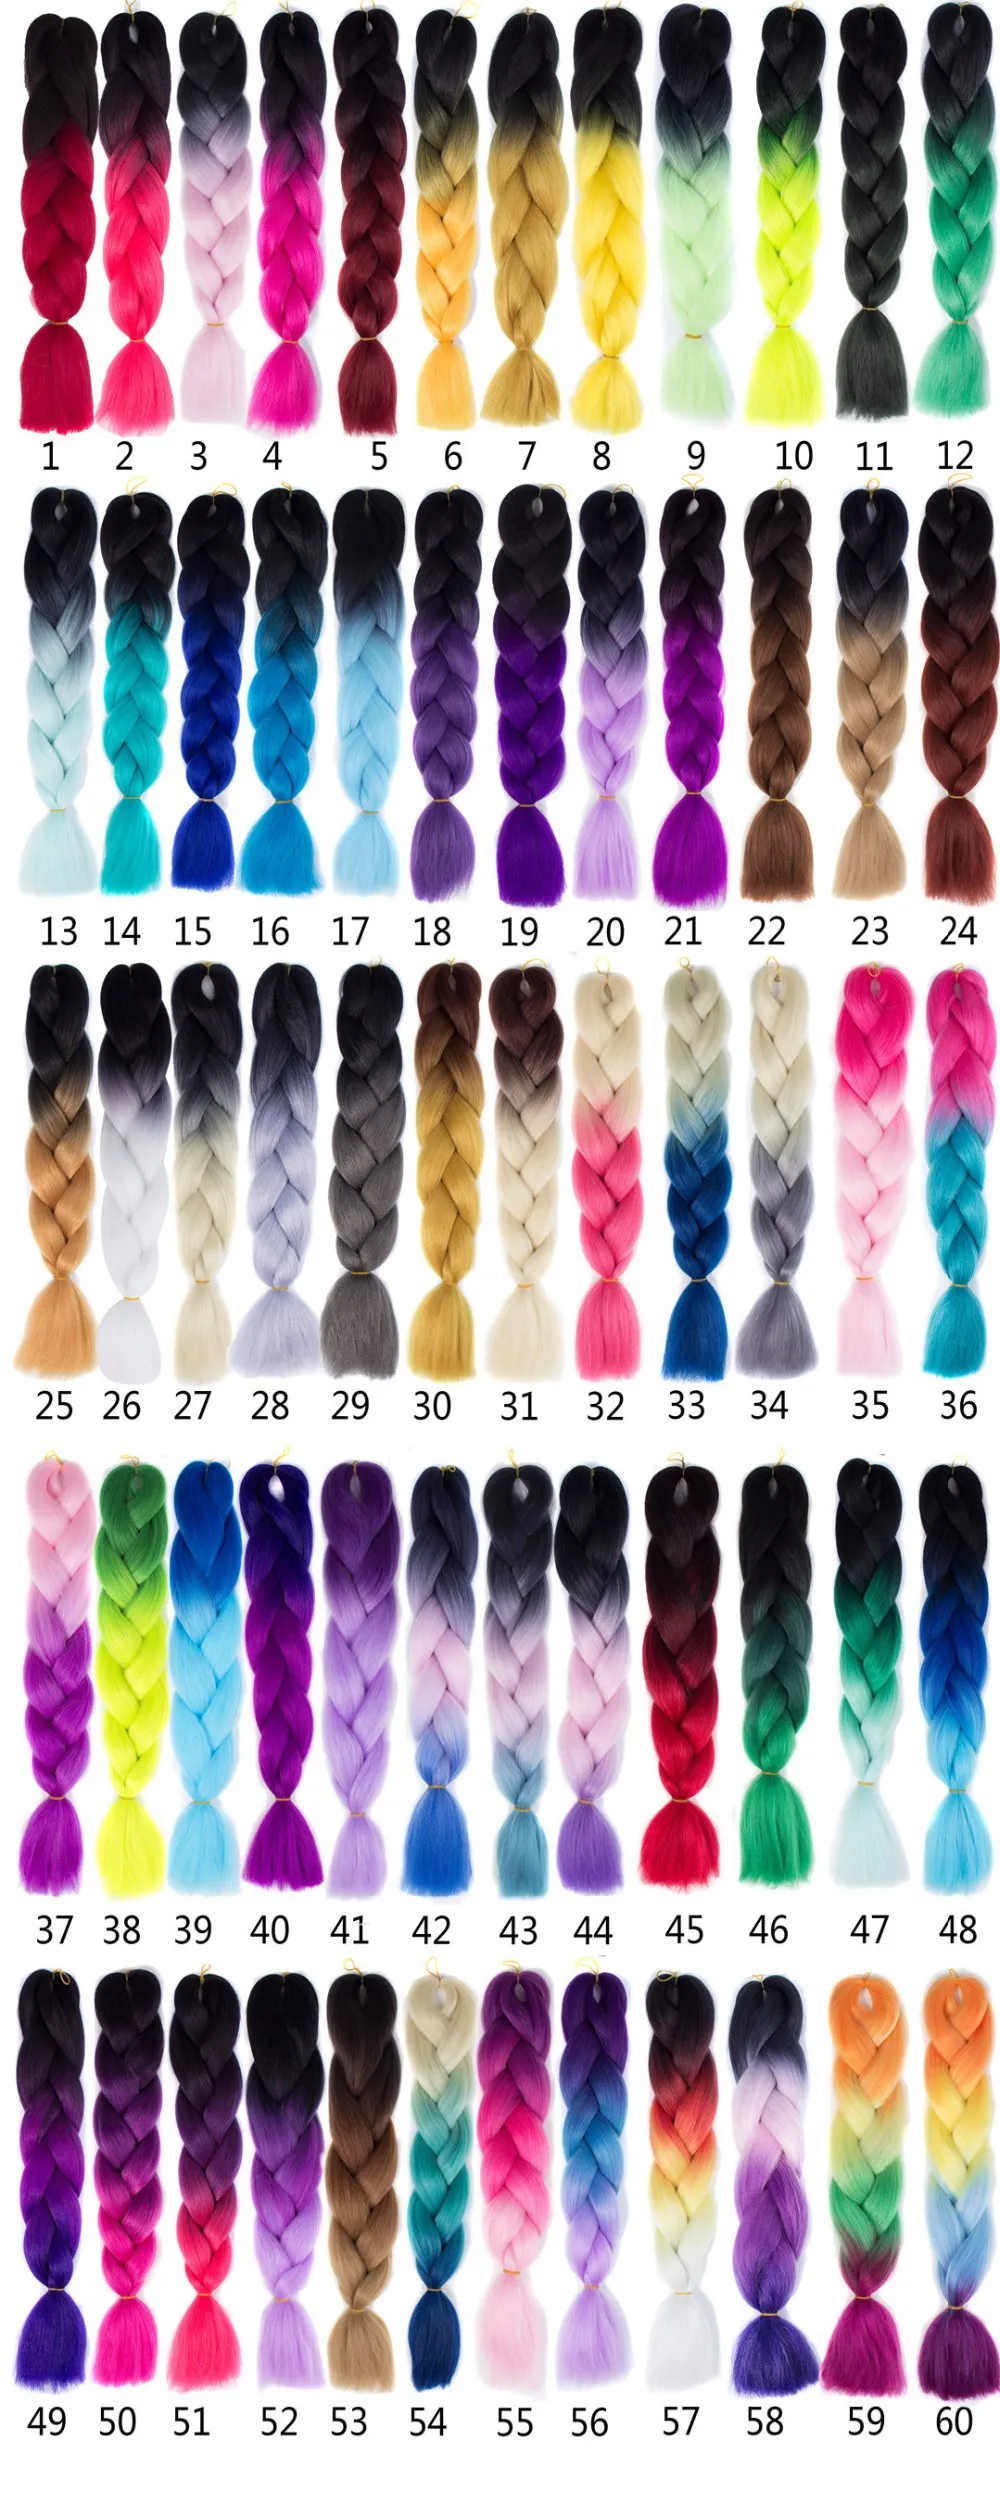 Yaopoly Hair Hot Sale Crochet Braid Hair Products Synthetic Ombre Braid Color Jumbo Braiding Hair Extension Buy Ombre Braid Color Jumbo Braiding Hair Extension Crochet Braid Hair Aliexpress Hair Product On Alibaba Com